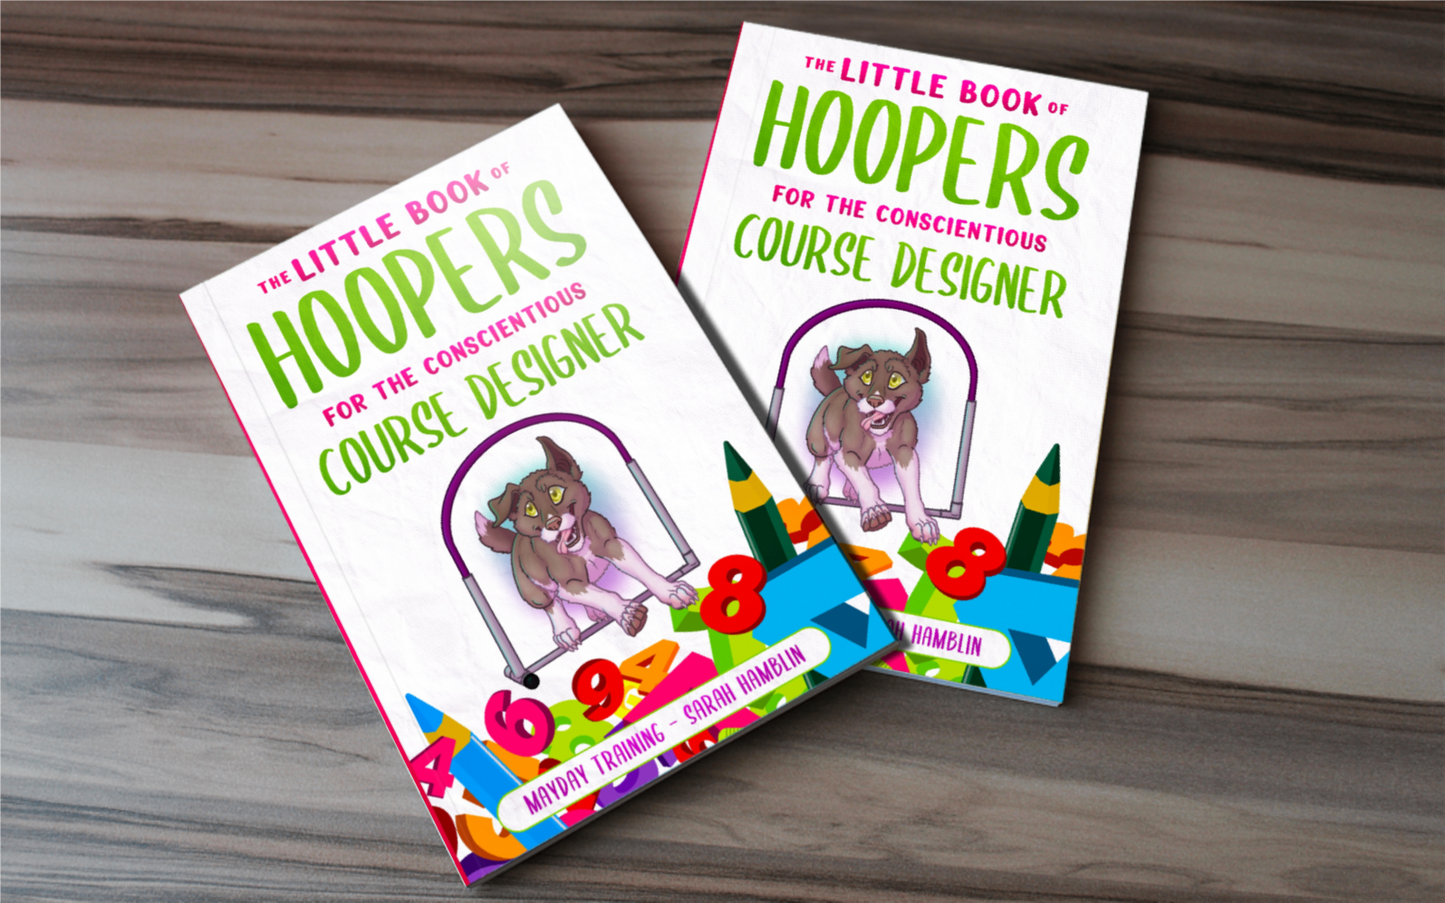 The Little Book of Hoopers Course Design